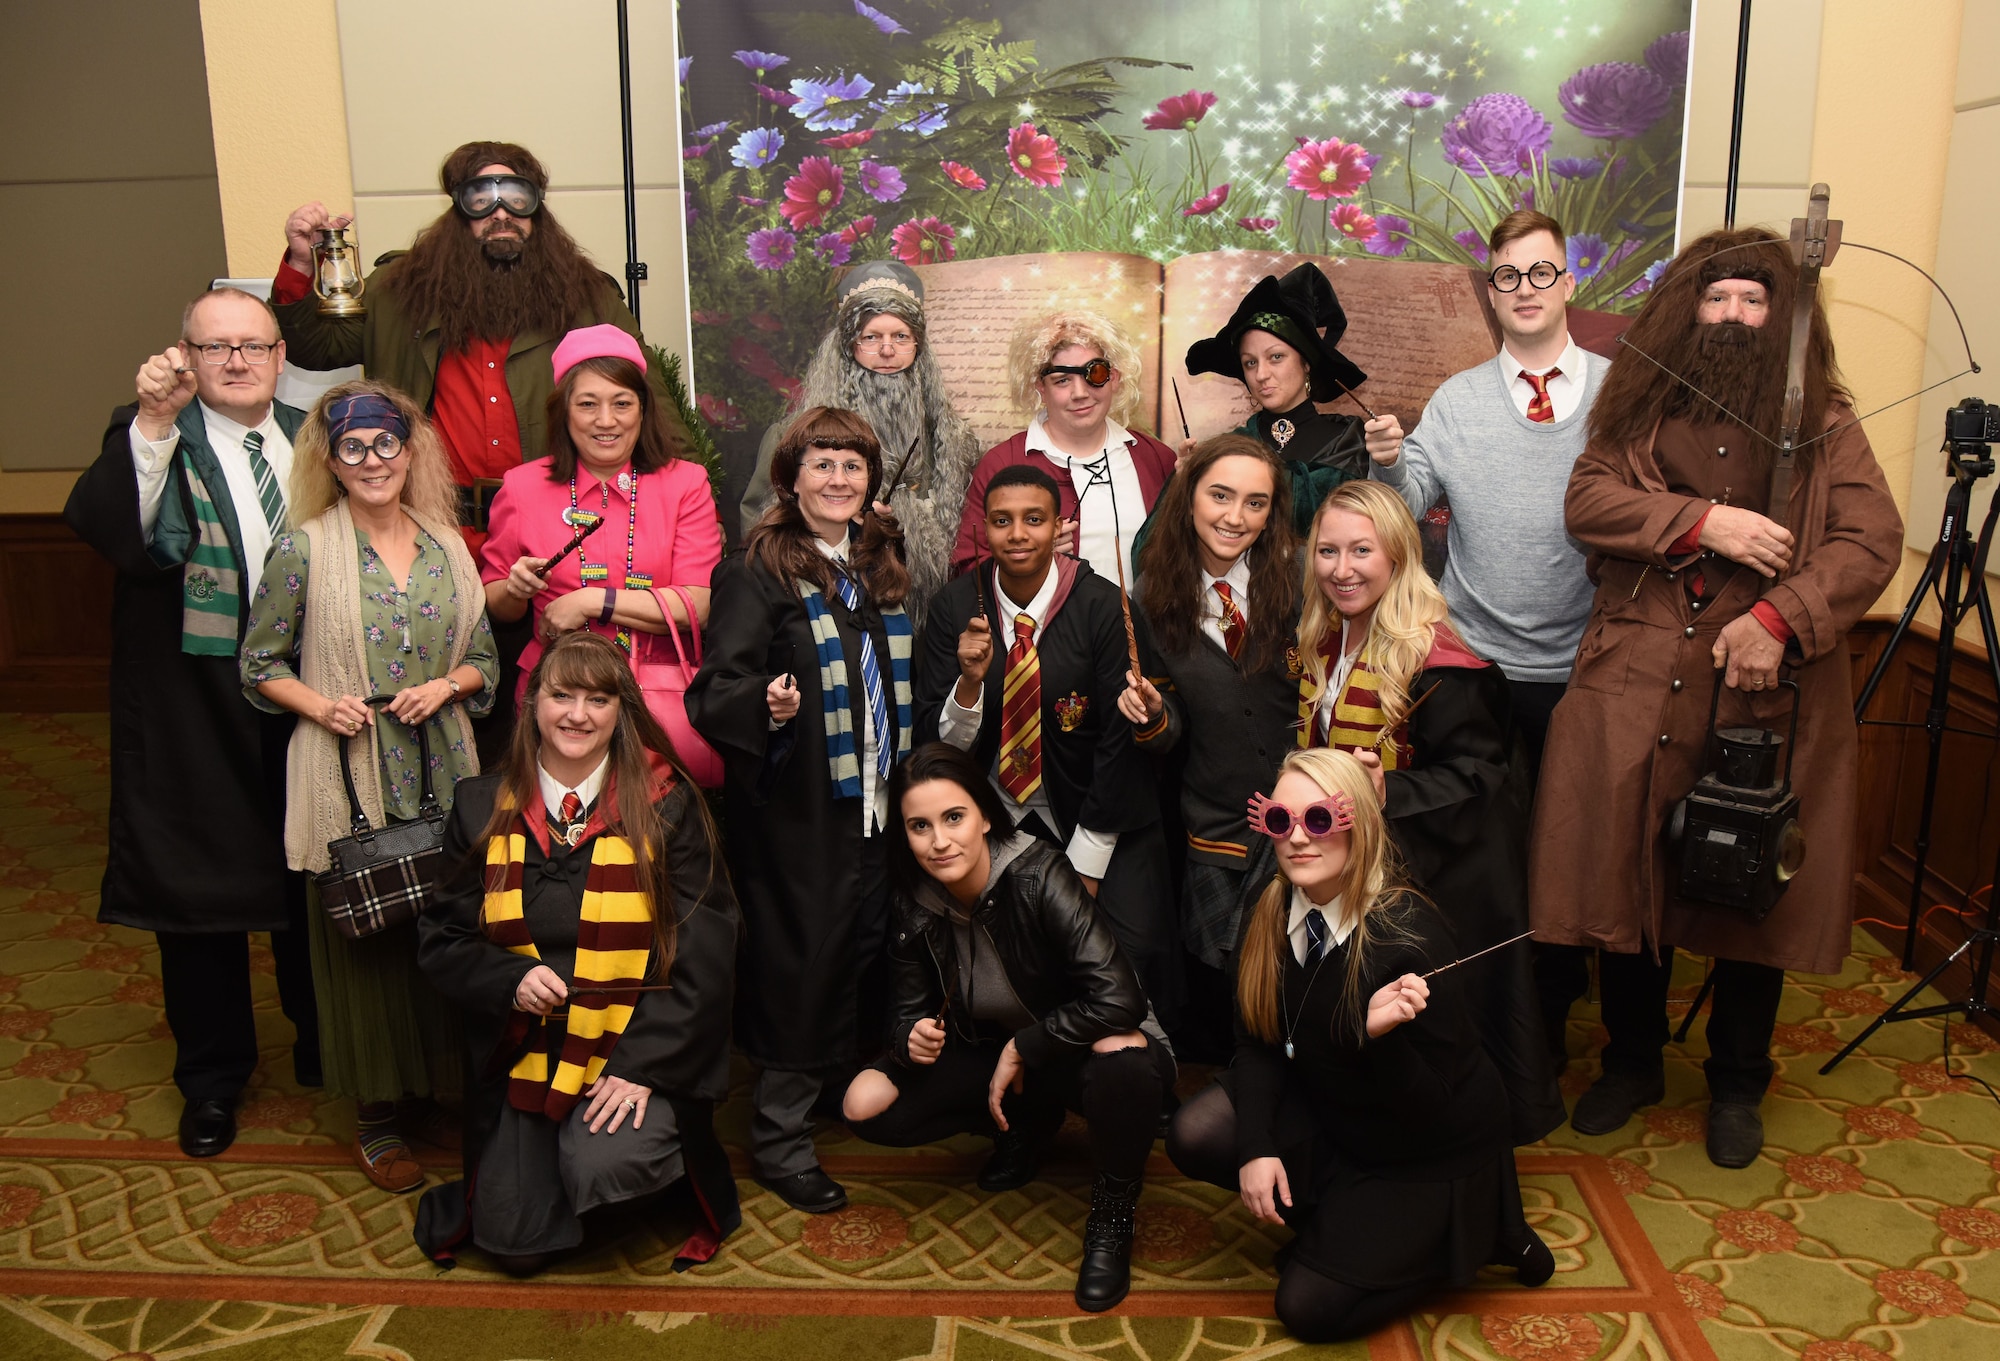 Members of the 81st Dental Squadron pose for a photo as they portray the cast of Harry Potter during the 30th Annual Krewe of Medics Mardi Gras Ball at the Bay Breeze Event Center Feb. 3, 2018, on Keesler Air Force Base, Mississippi. The Krewe of Medics hosts a yearly ball to give Keesler Medical Center personnel a taste of the Gulf Coast and an opportunity to experience a traditional Mardi Gras. The theme for this year's ball was Read It-Be It. The 81st DS won first place in the costume contest. (U.S. Air Force photo by Kemberly Groue)